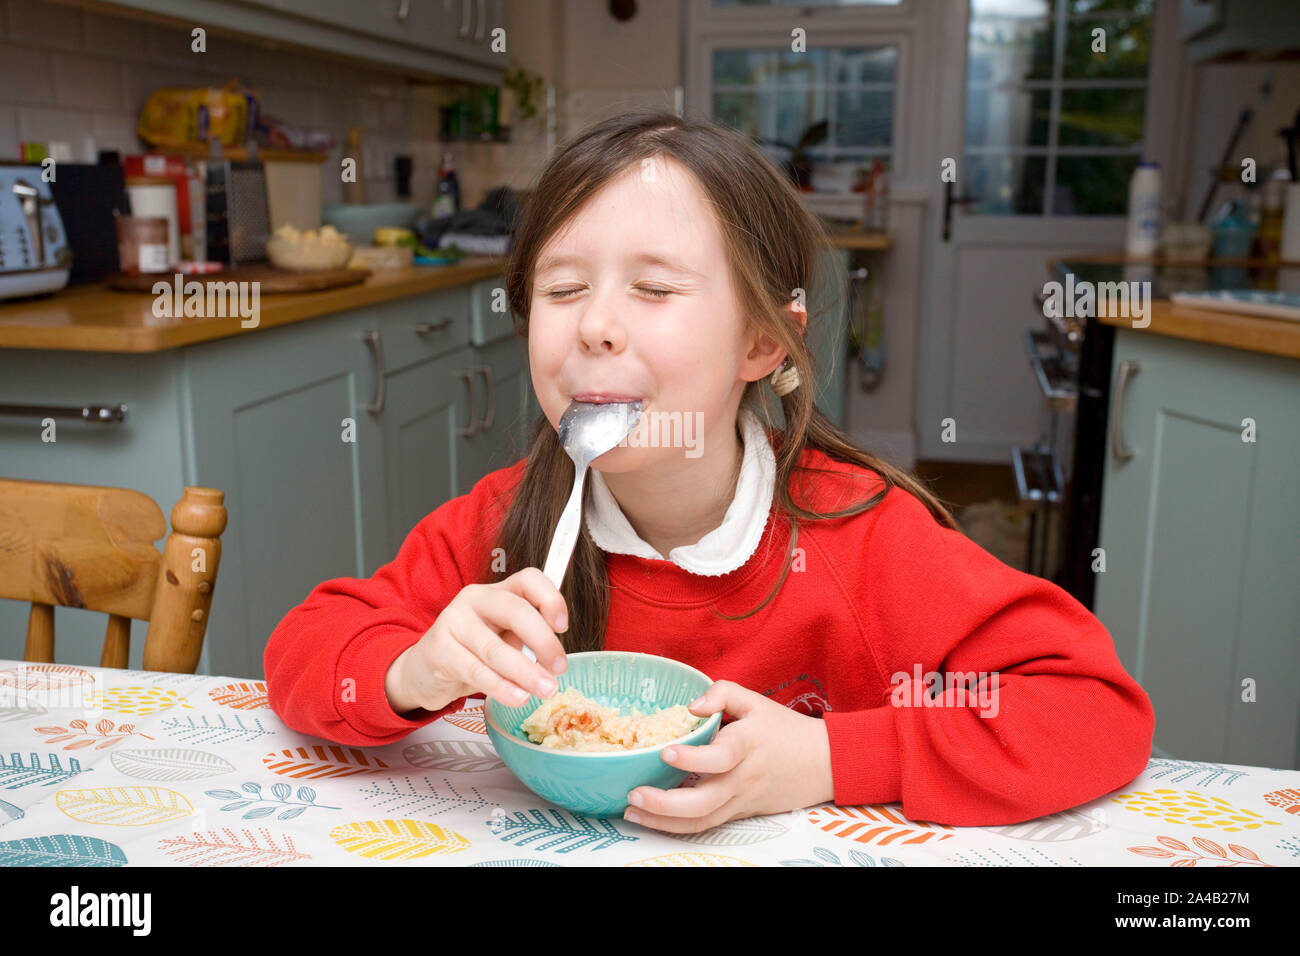 Young girl enjoying rice pudding at the kitchen table Stock Photo